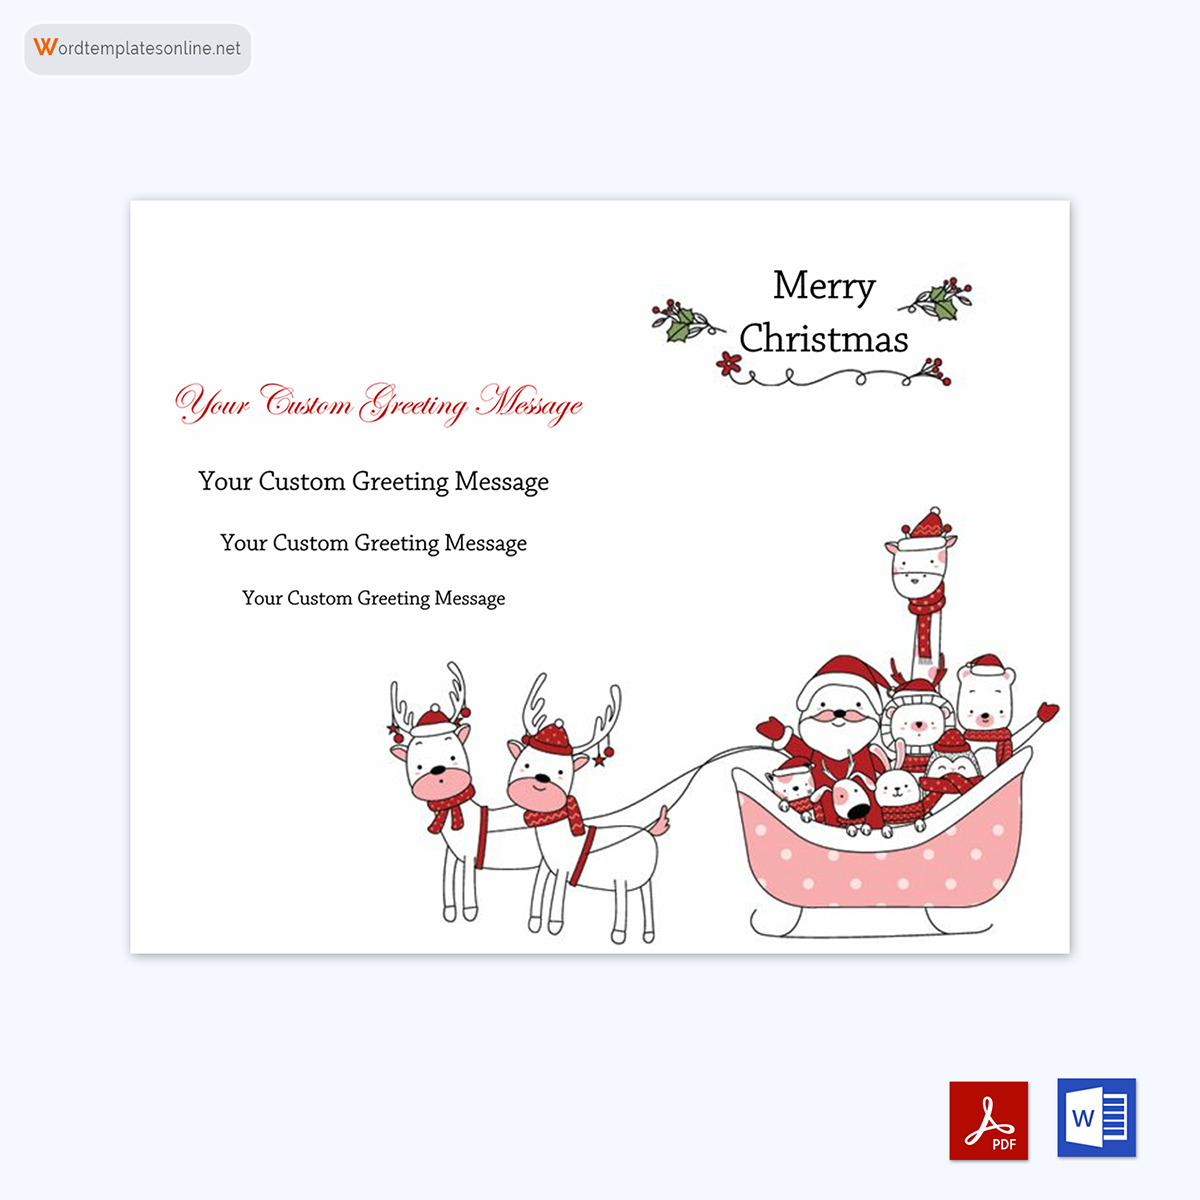 Greeting card template for Christmas